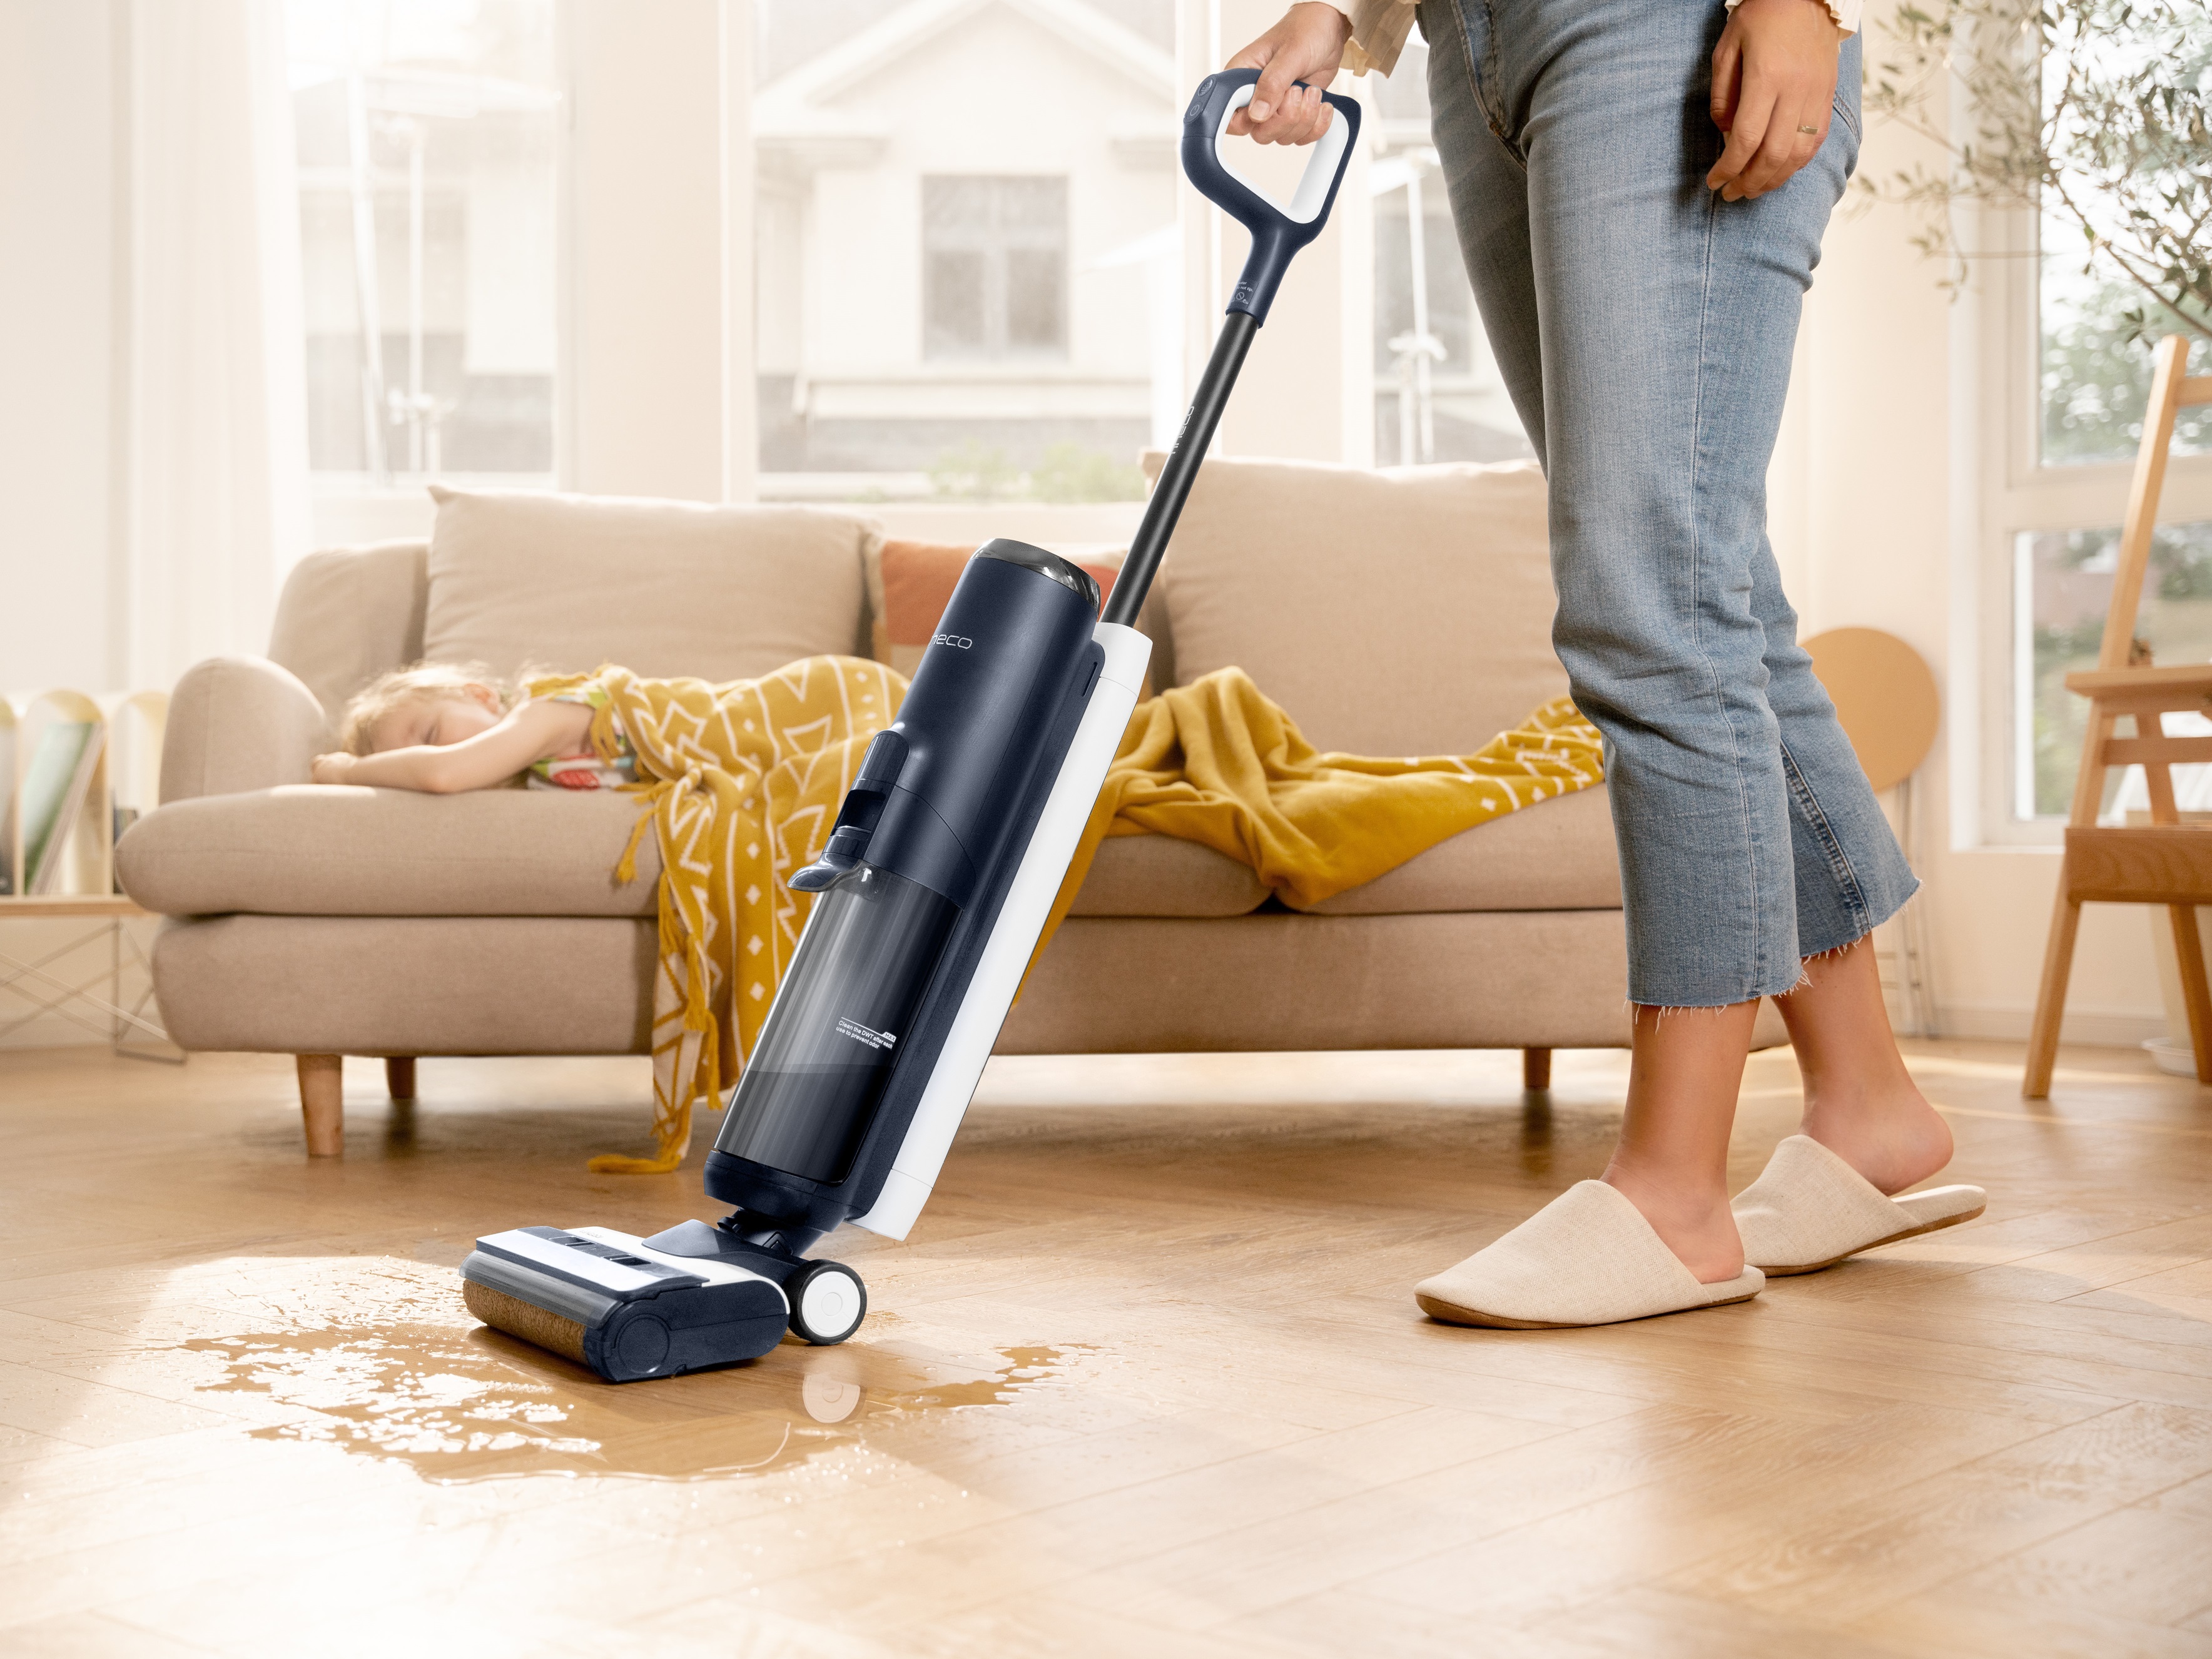 Tineco - Explore what makes our S5 family of floor washers